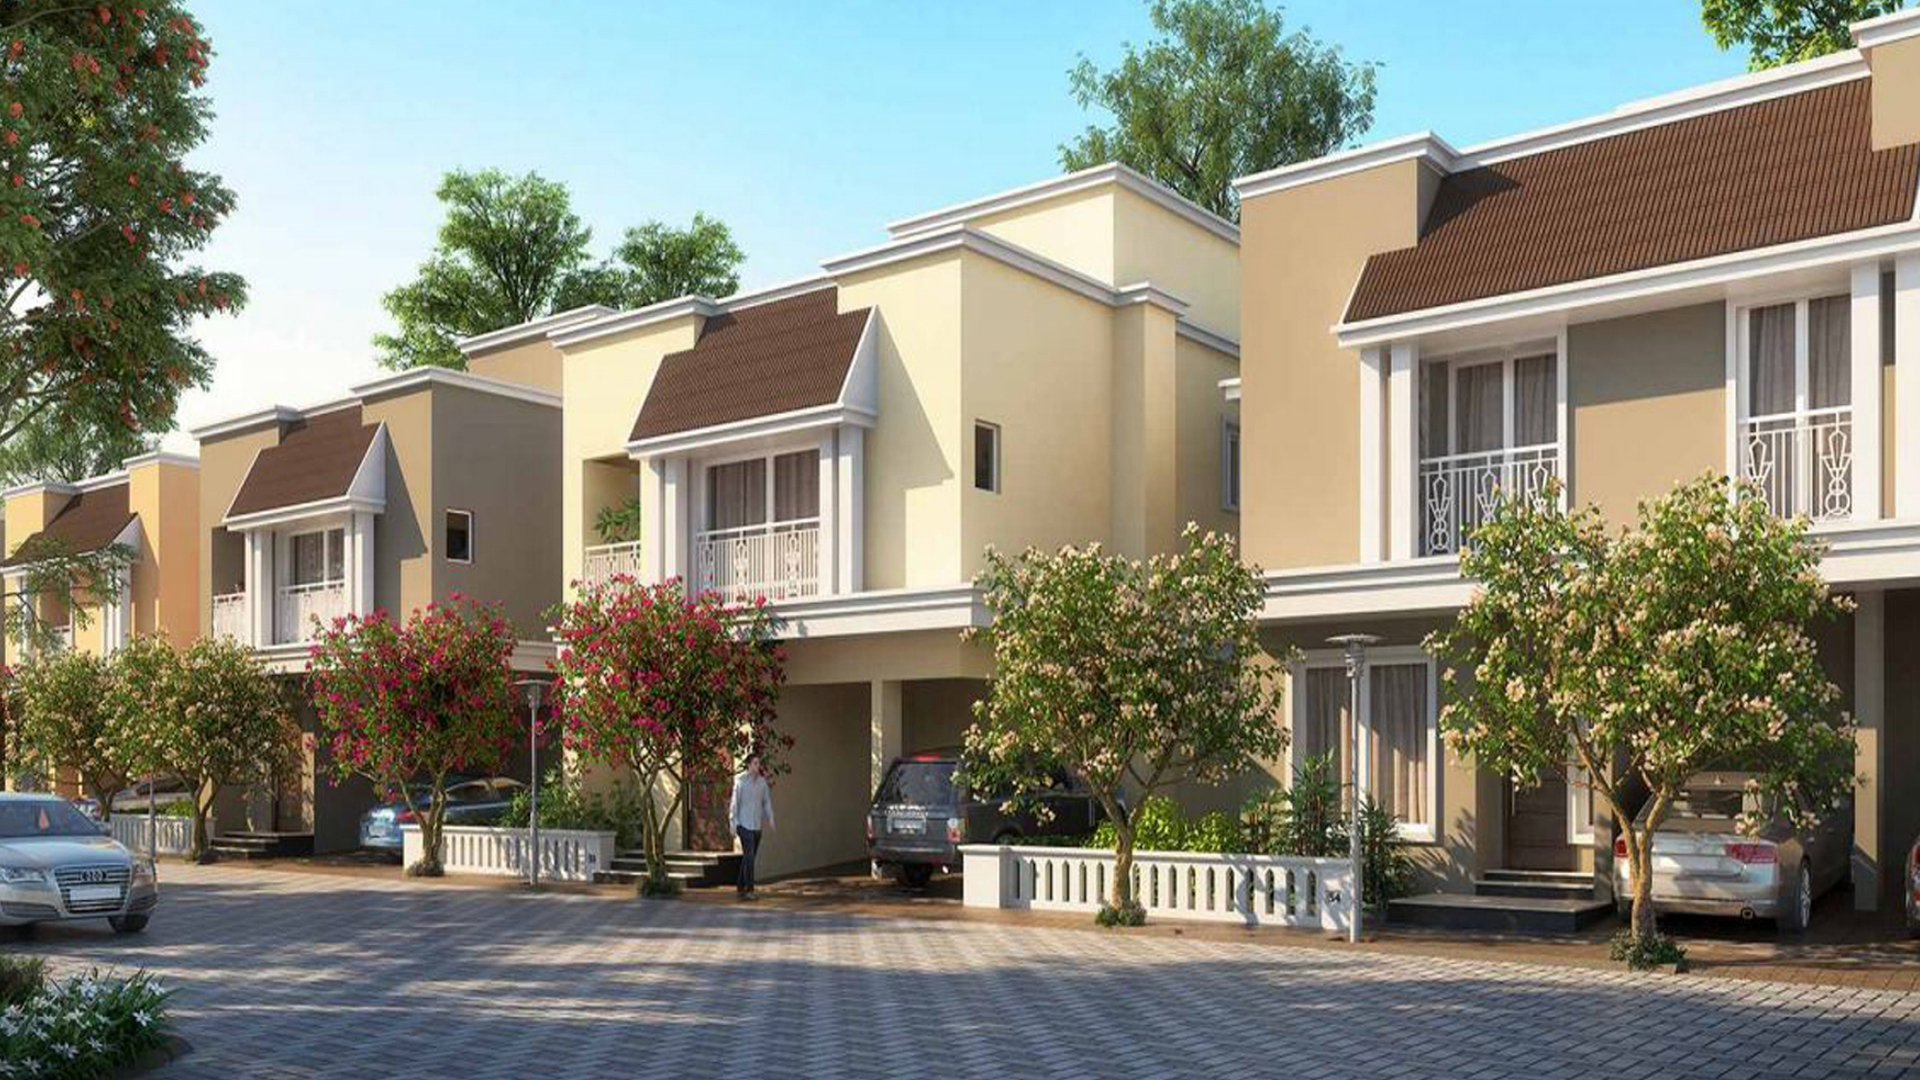 2, 4 BHK House for sale in Vengaivasal